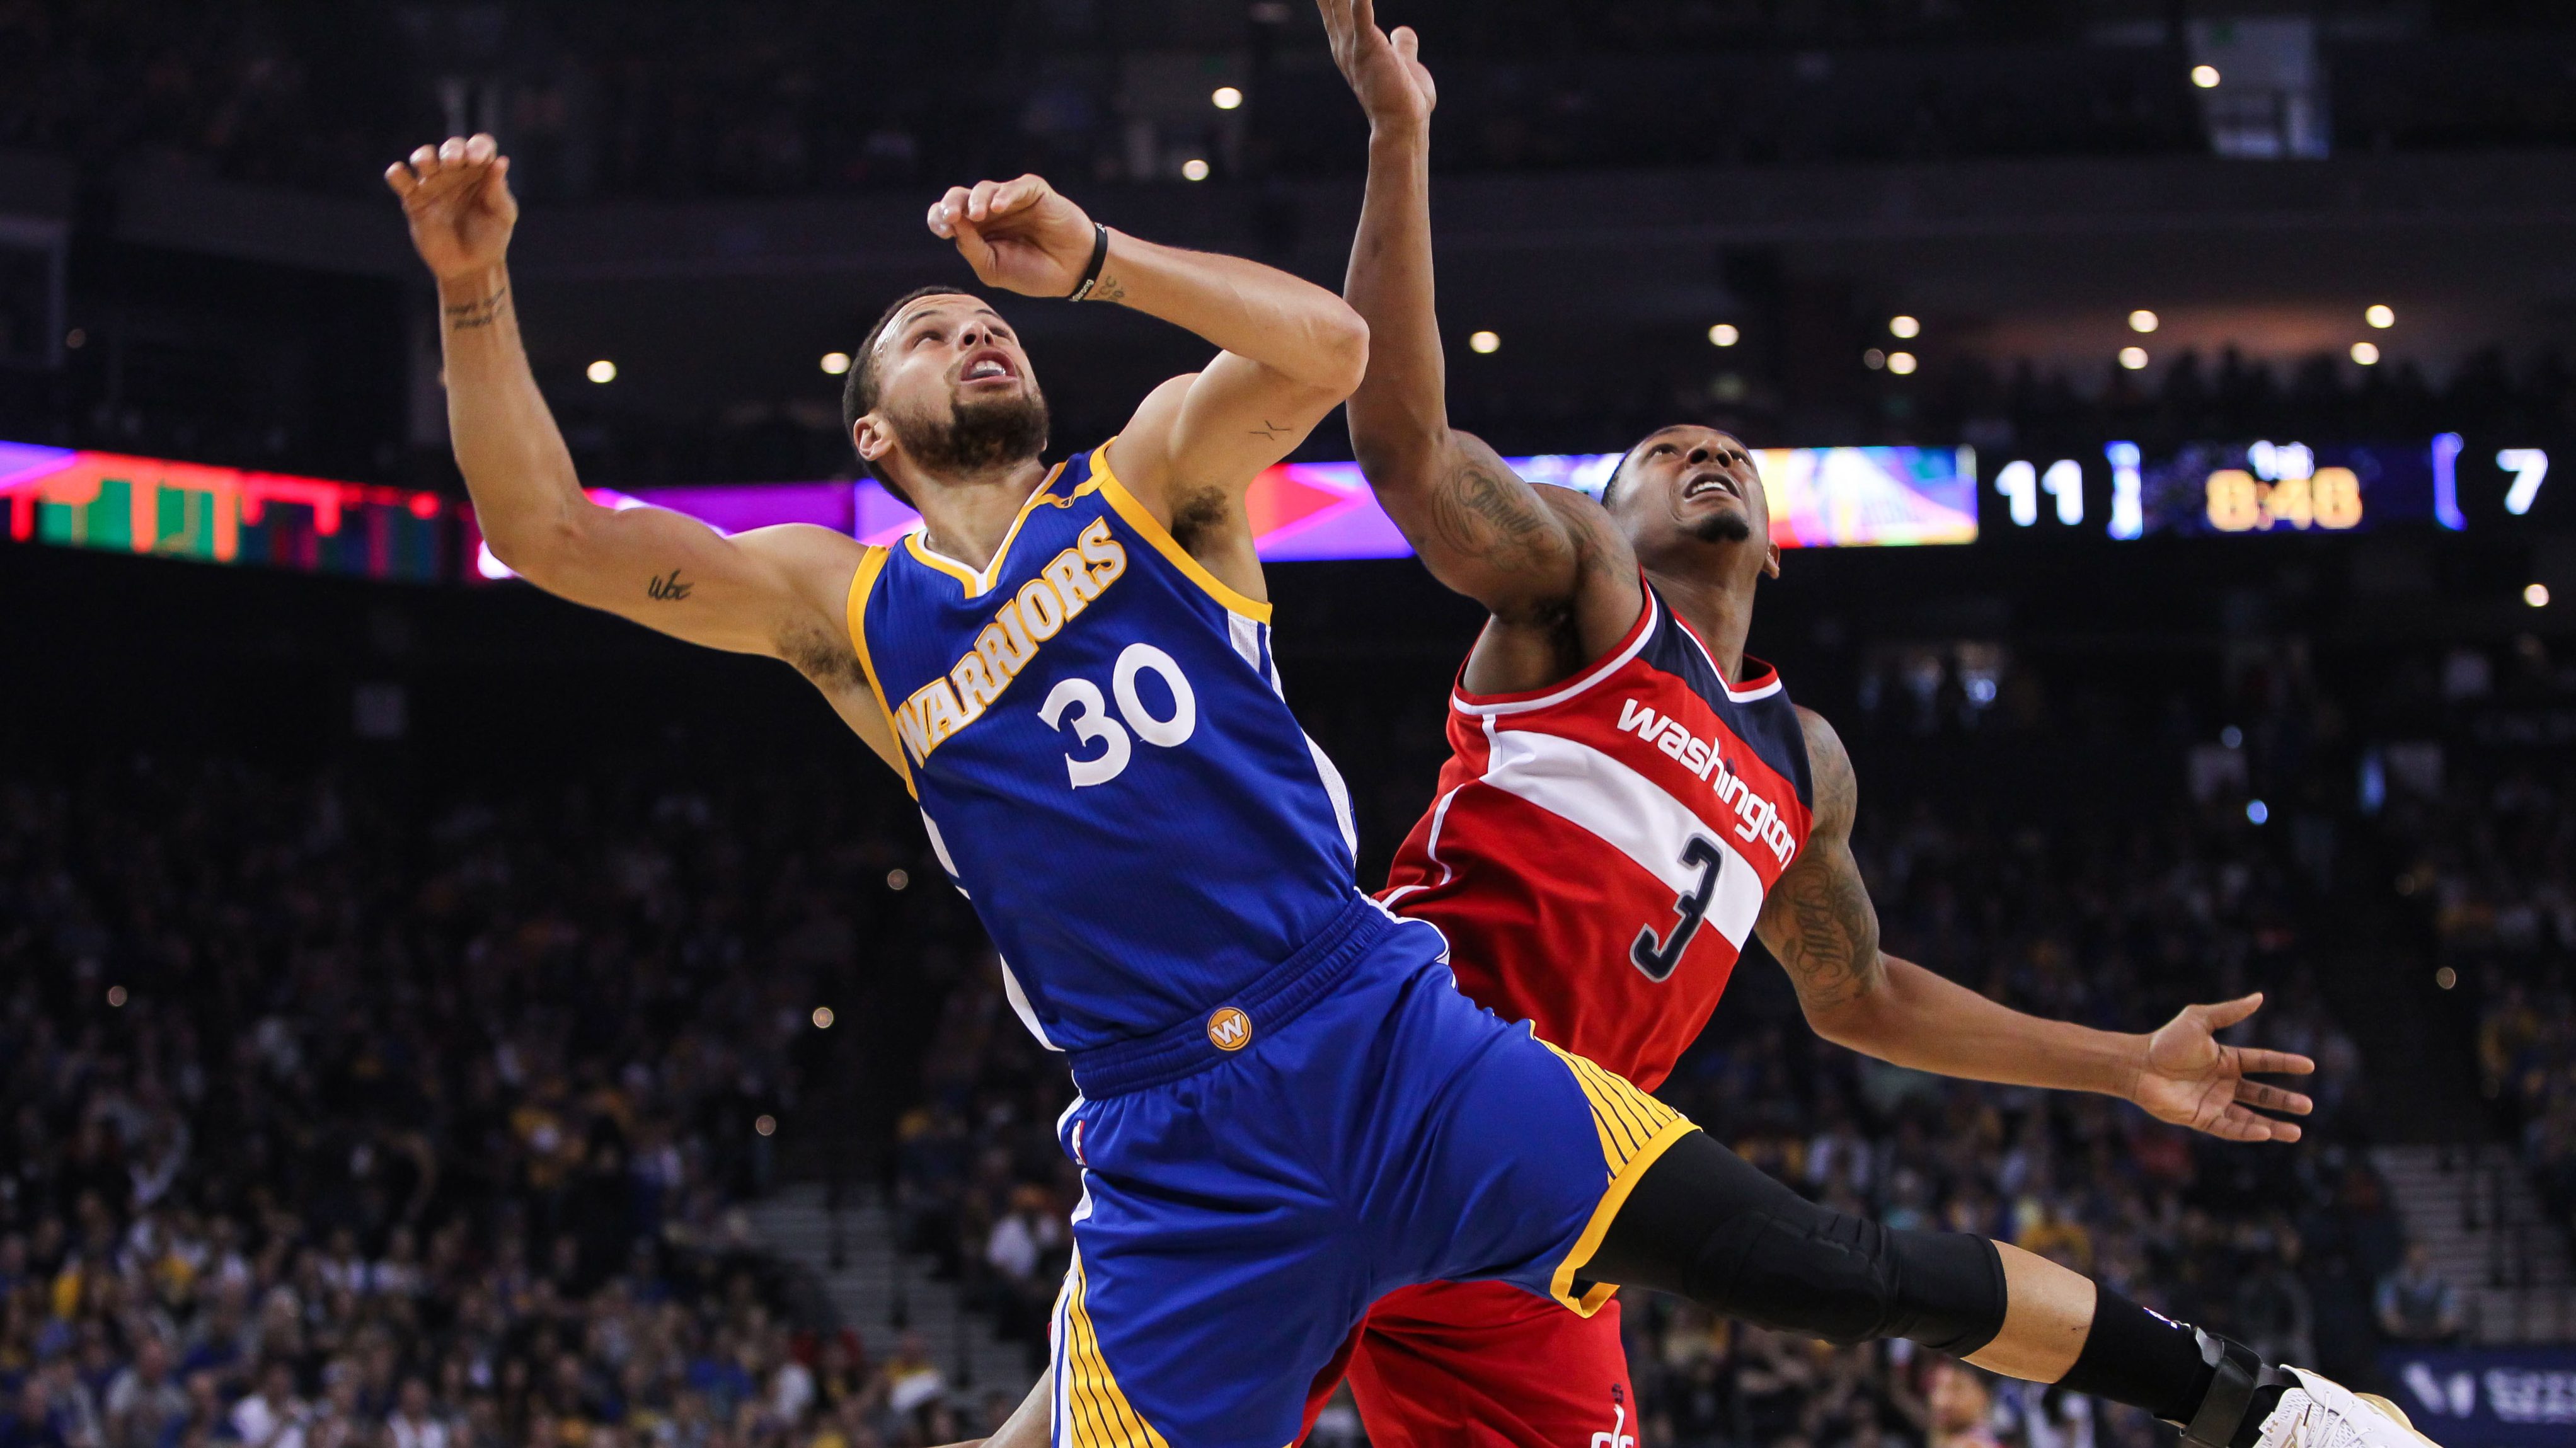 Bradley Beal, Stephen Curry Set to Collide Amid Close Scoring Title Battle